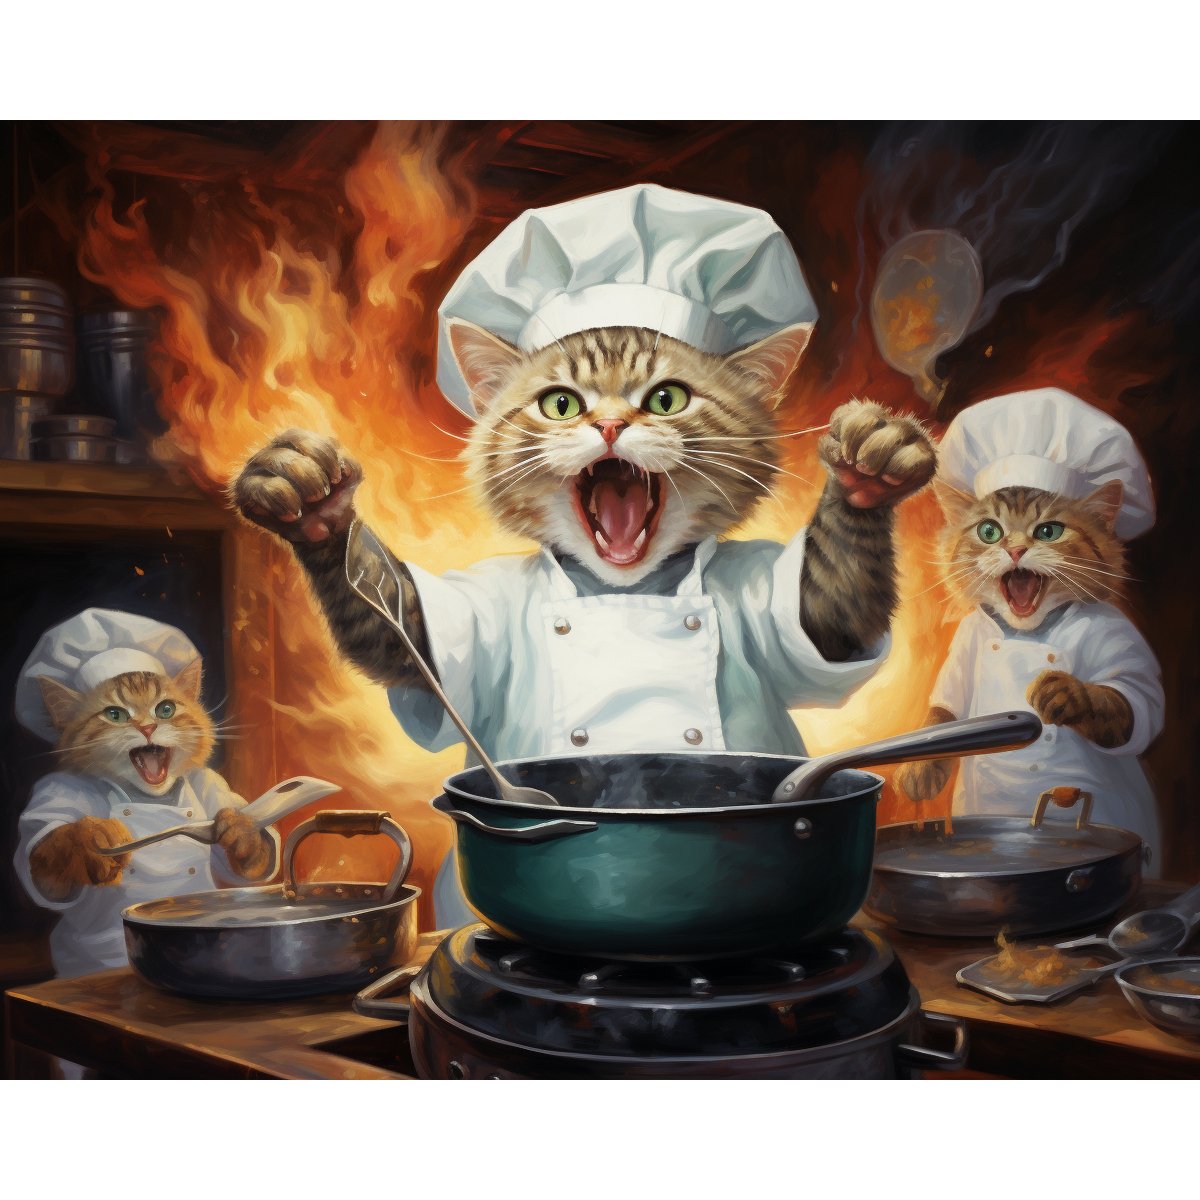 Chef Mittens - Paint Me Up - pbn_kit